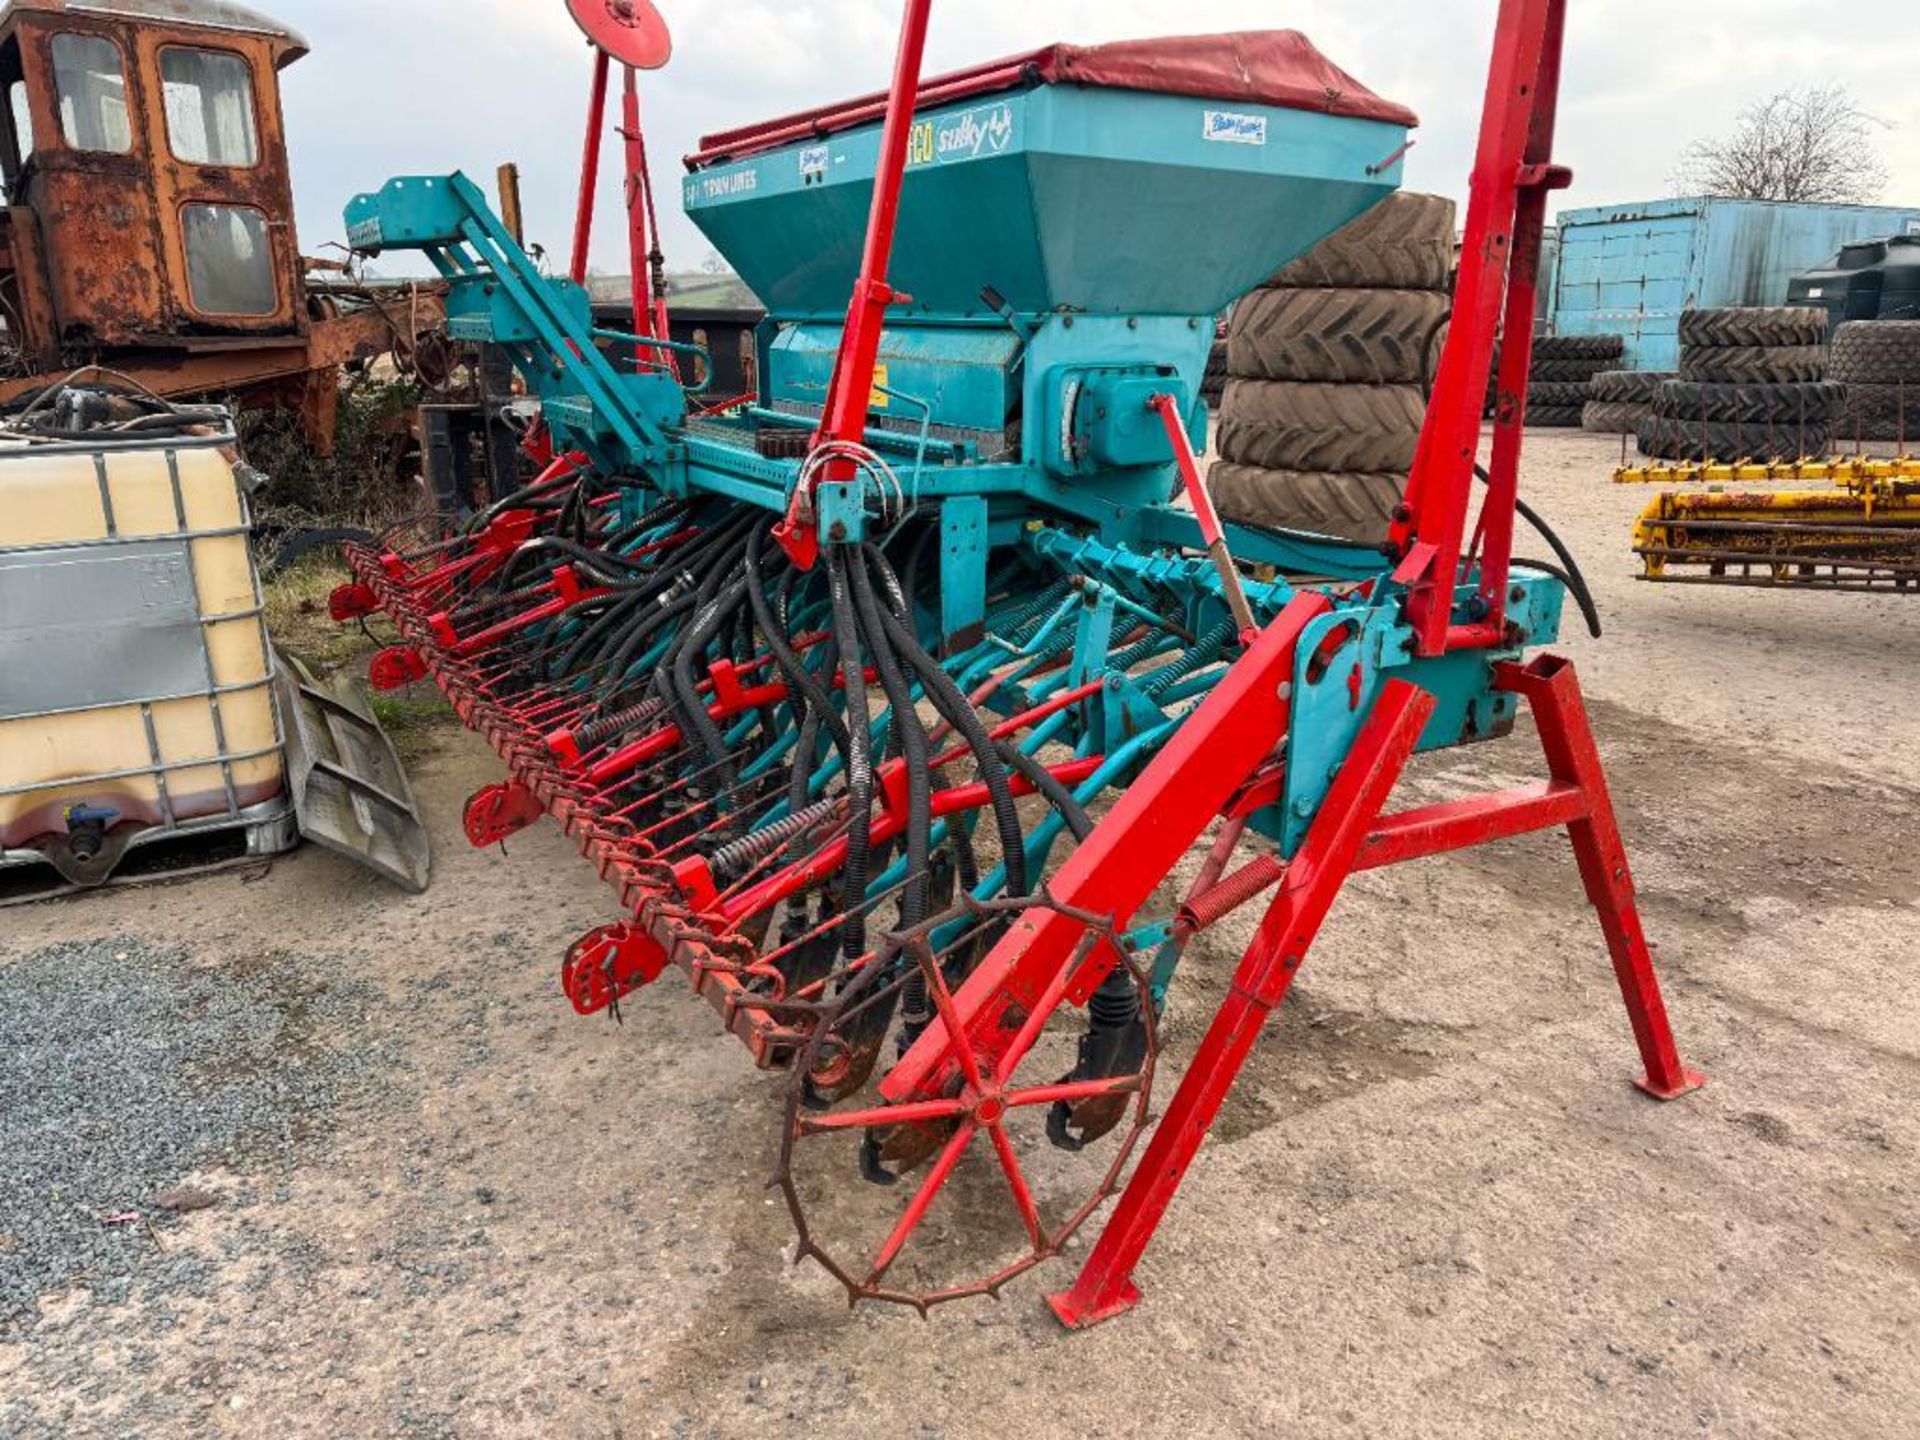 1994 Sulky Spi 4m piggy back drill with tramline and bout markers. Serial No: SP05105 - Image 9 of 9